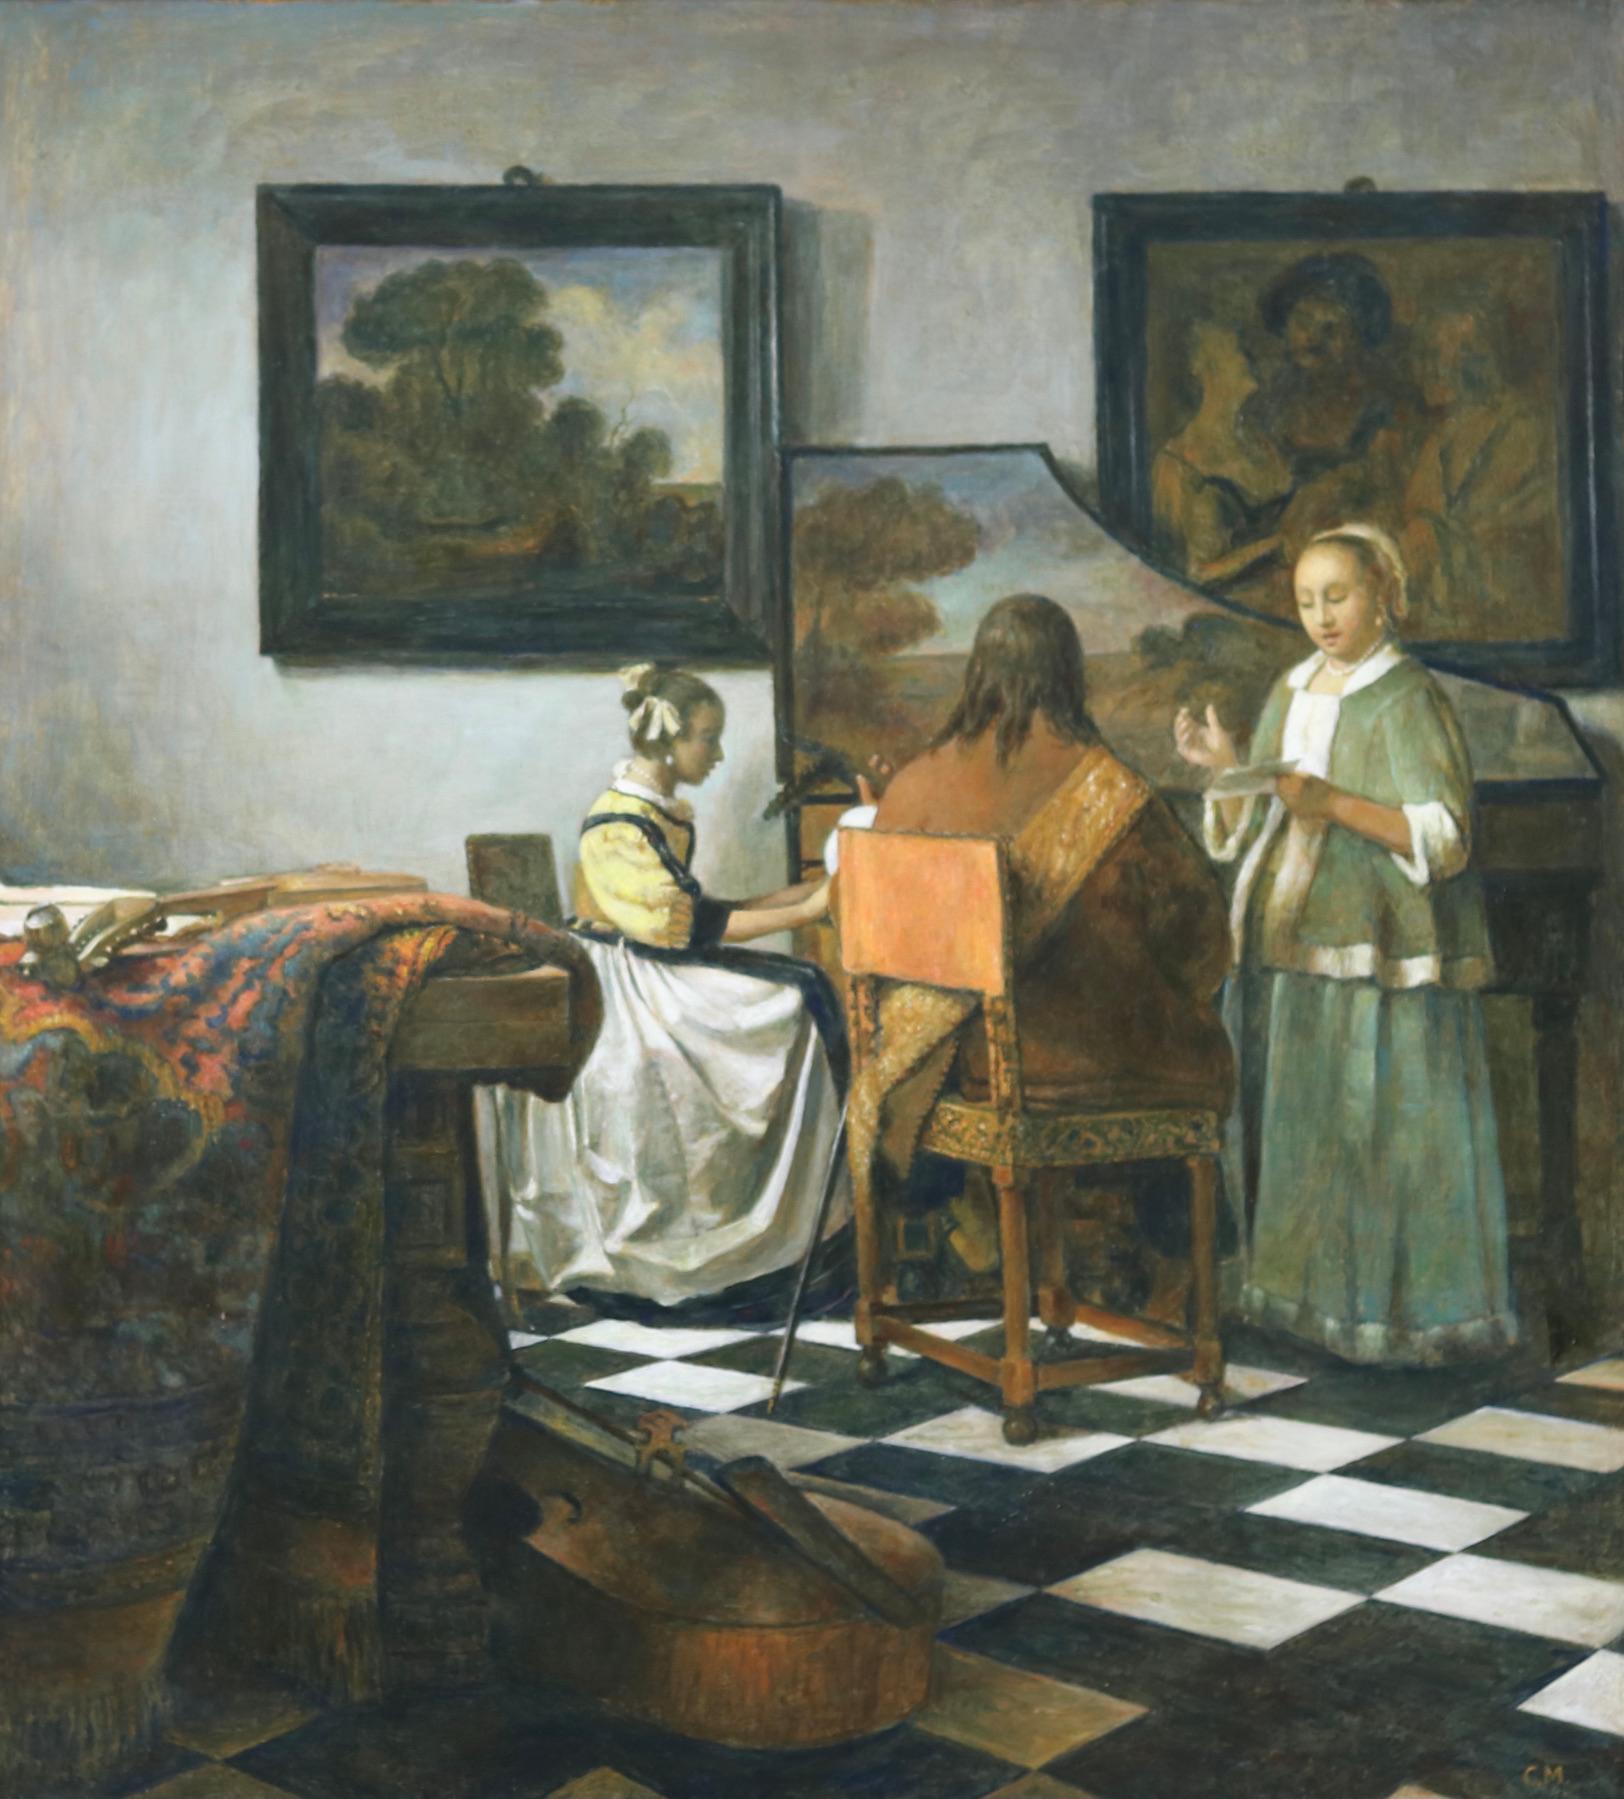 The Concert - 21st Century Classical Style Oil Painting (after Vermeer)